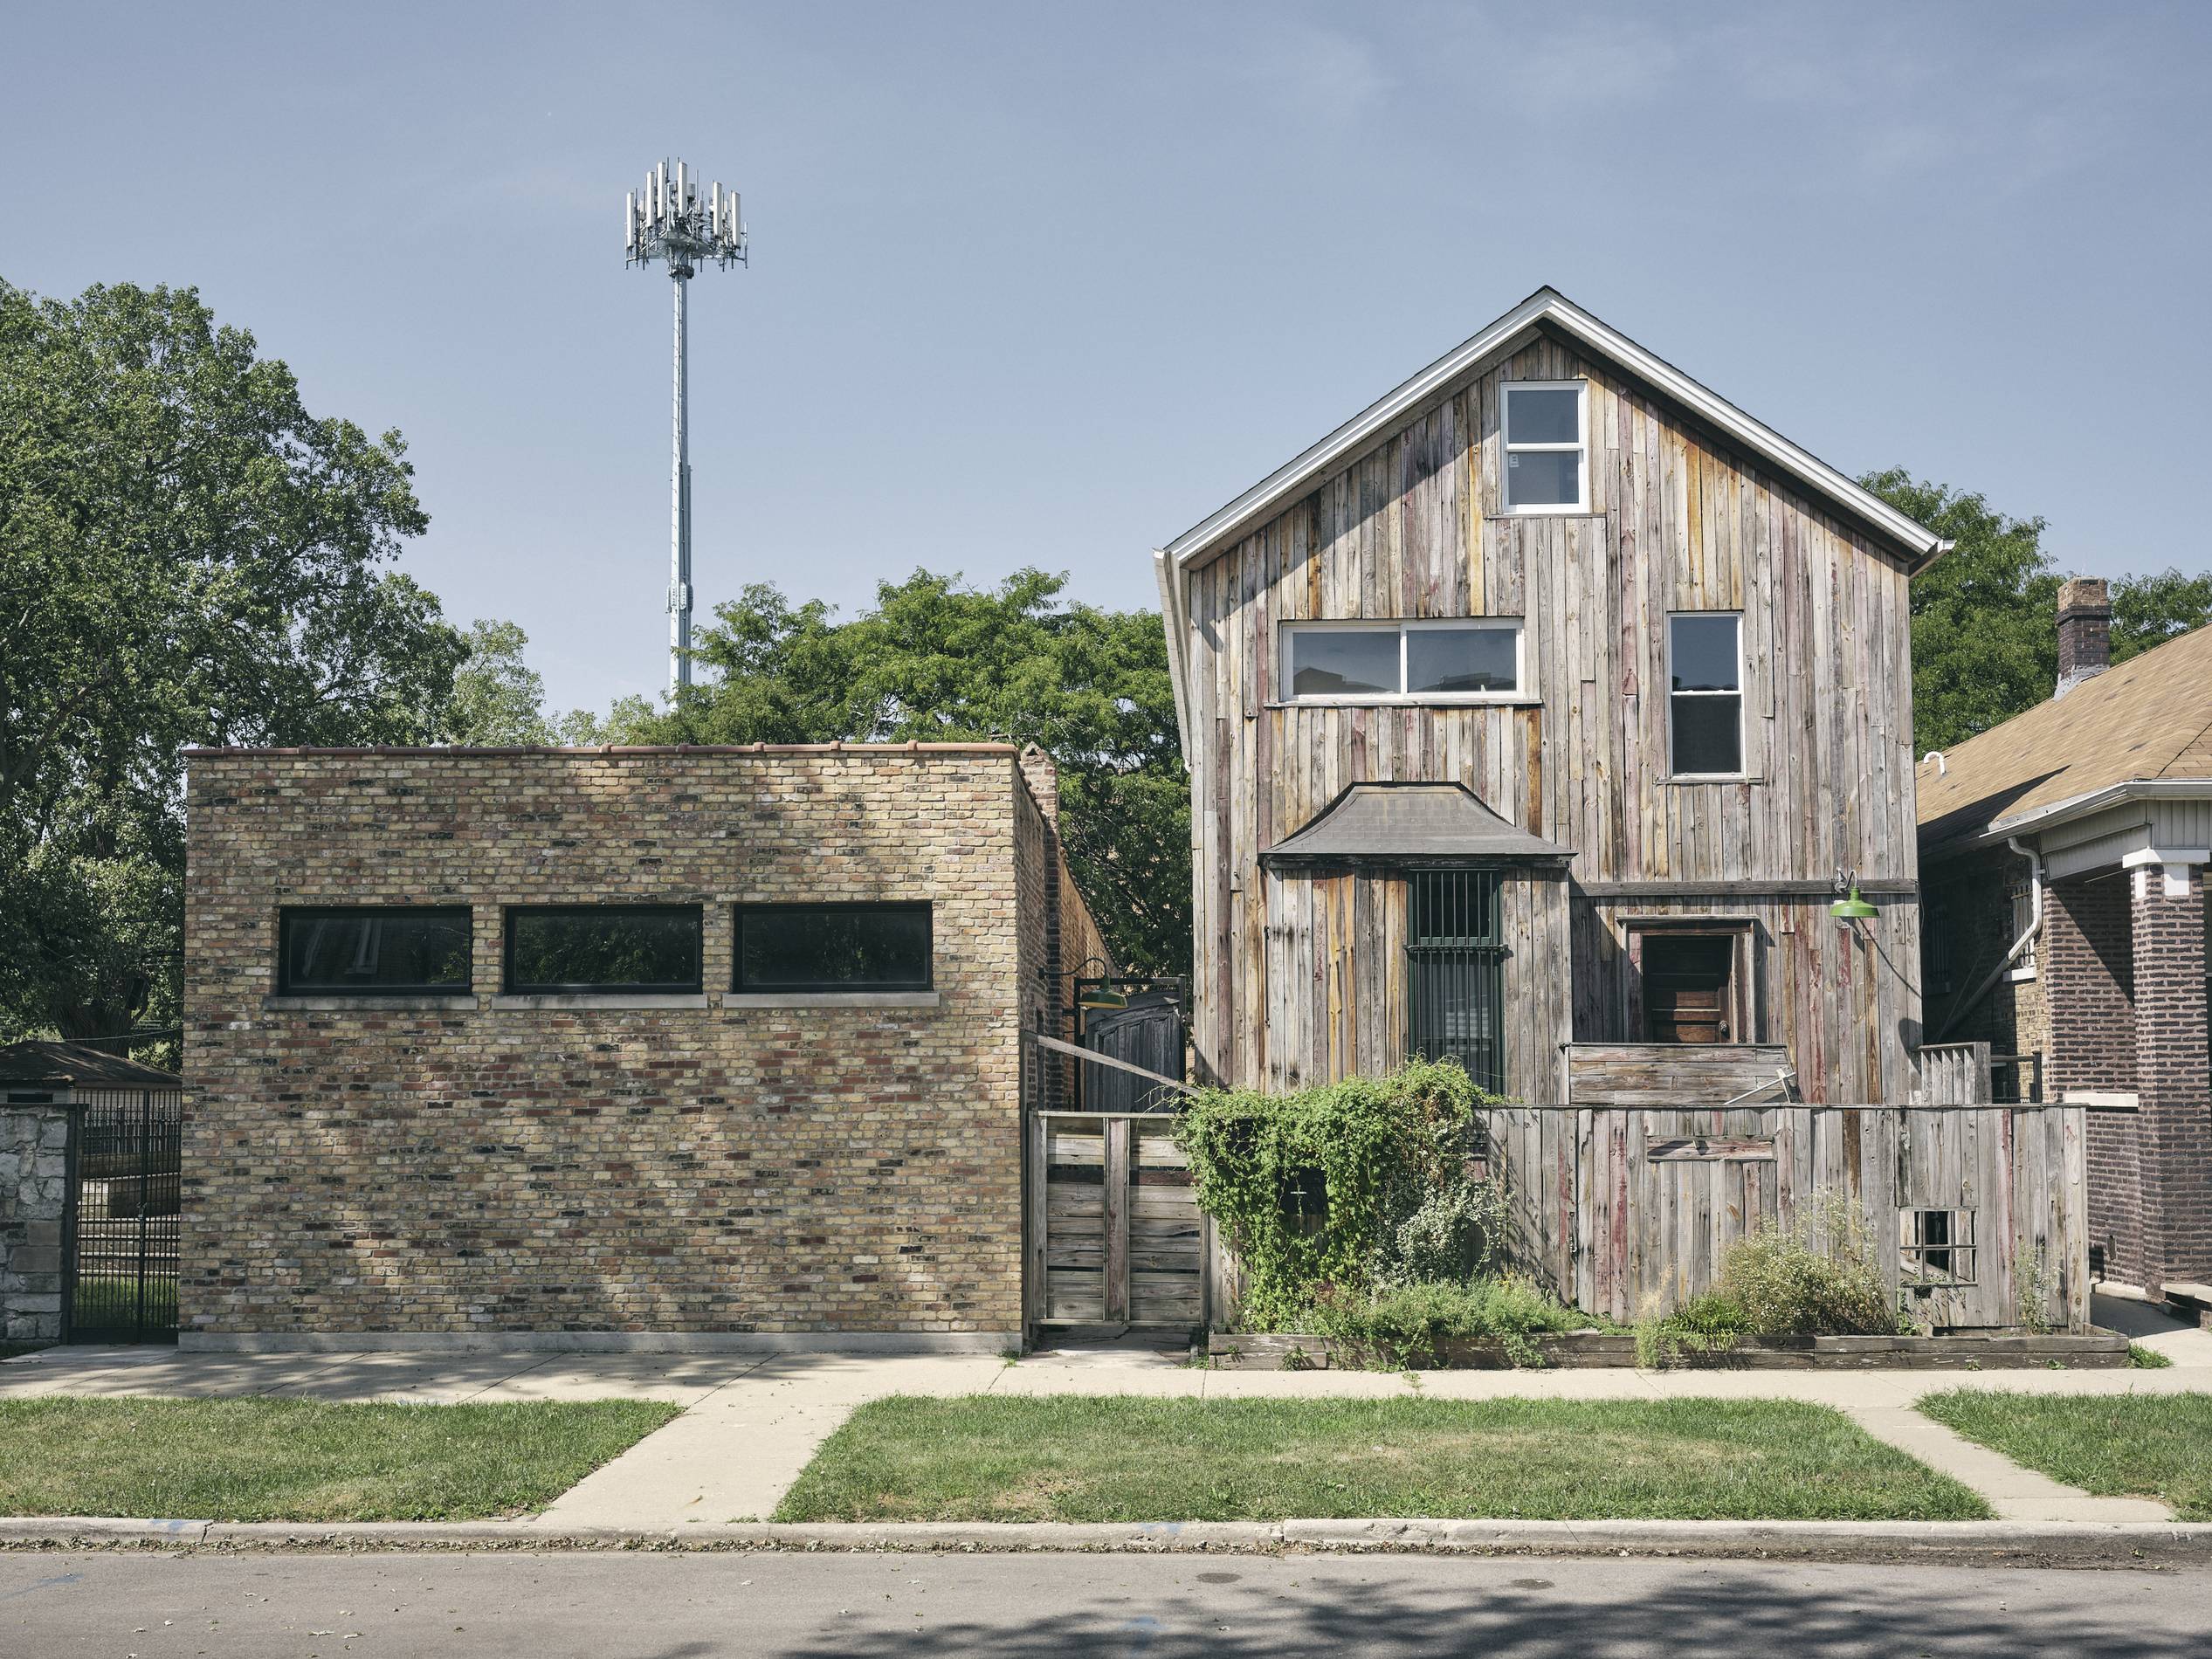 Prada Group x Theaster Gates Studio Experimental Design Lab in the South Side of Chicago